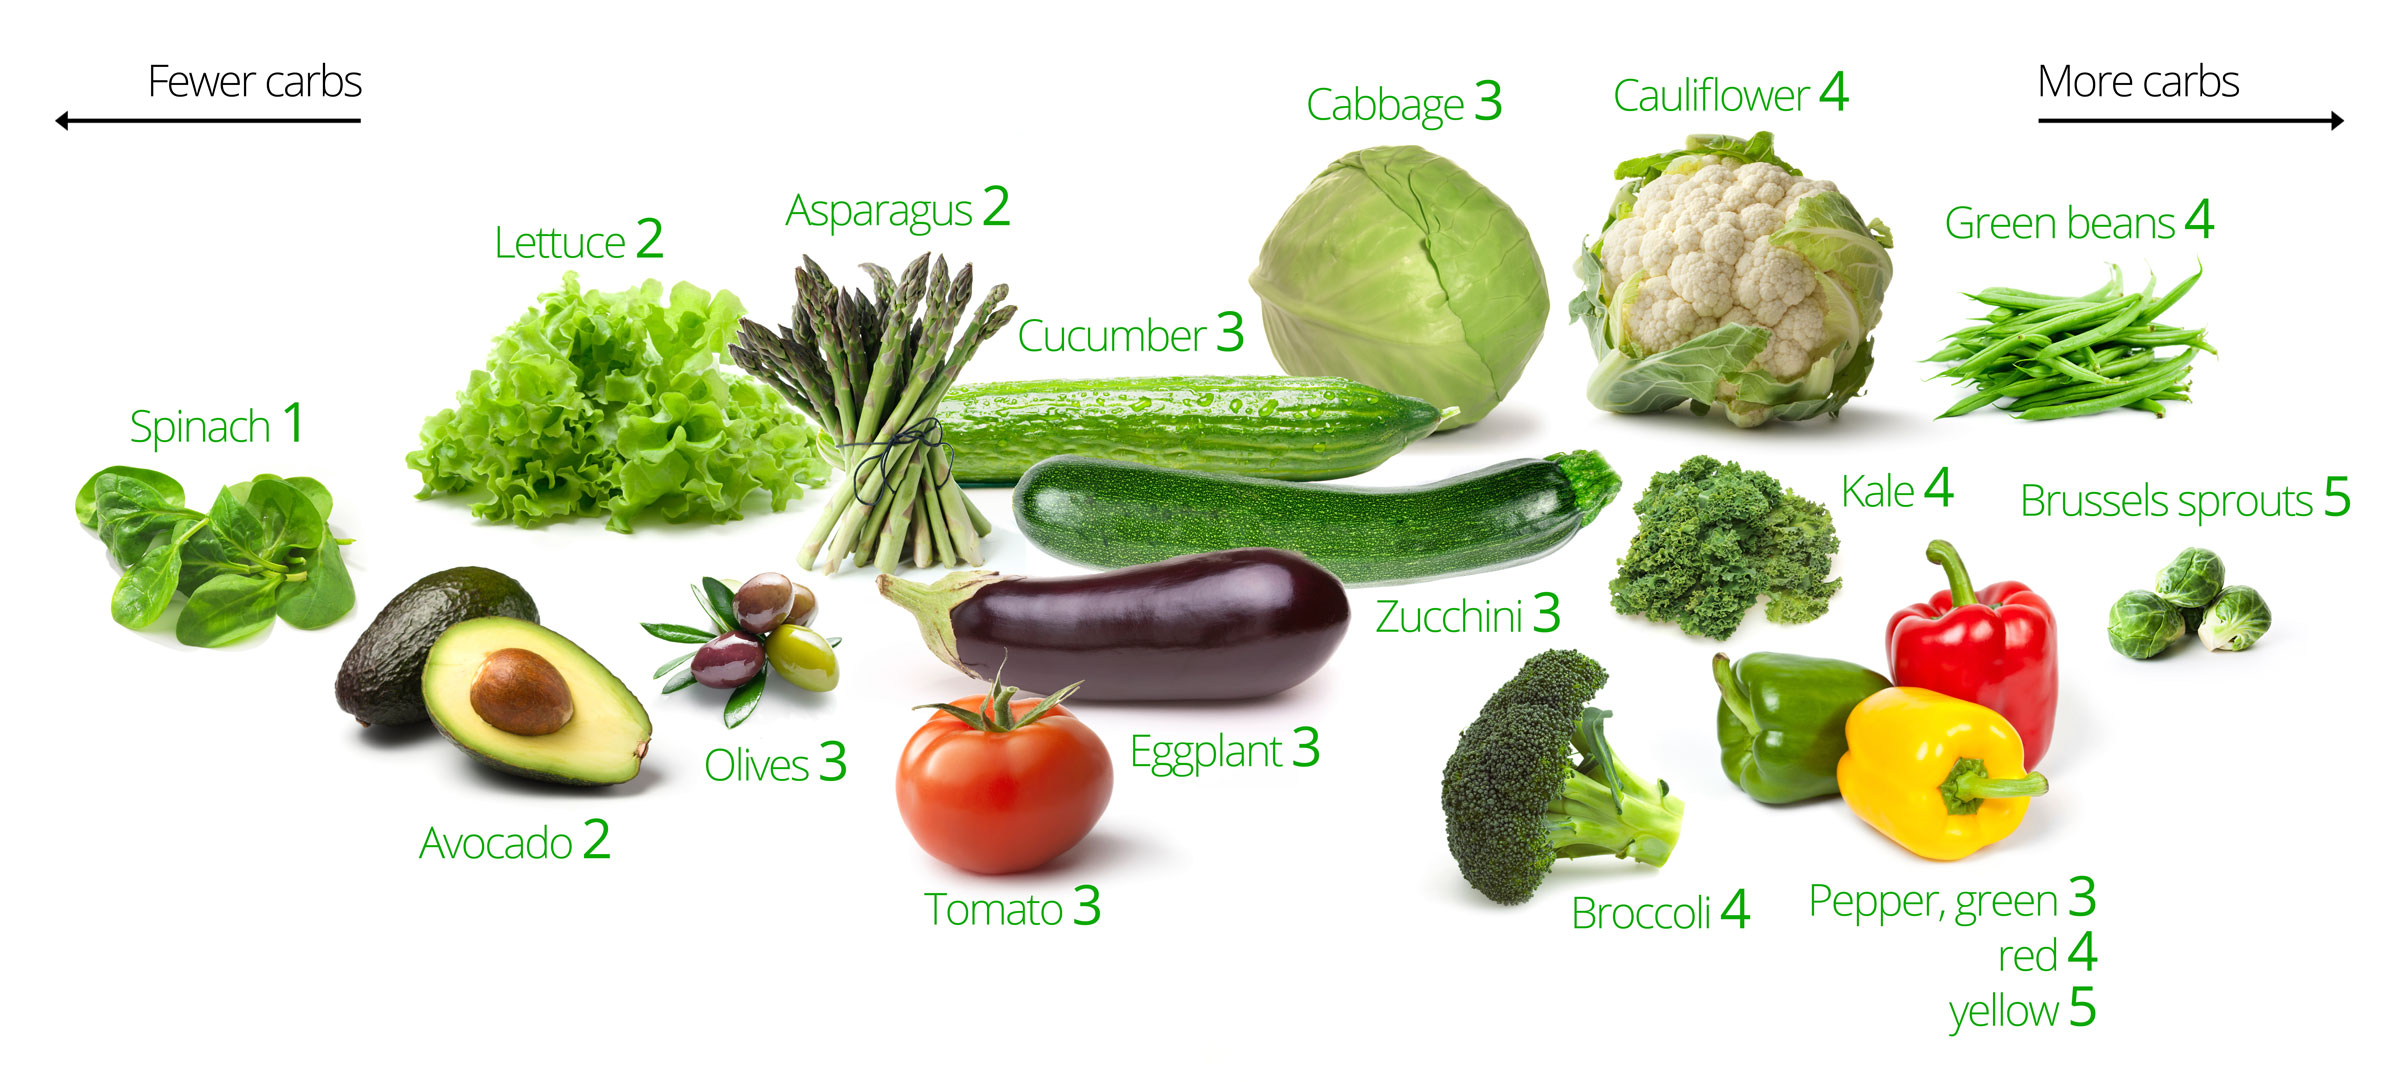 Low Carb Vegetables Chart